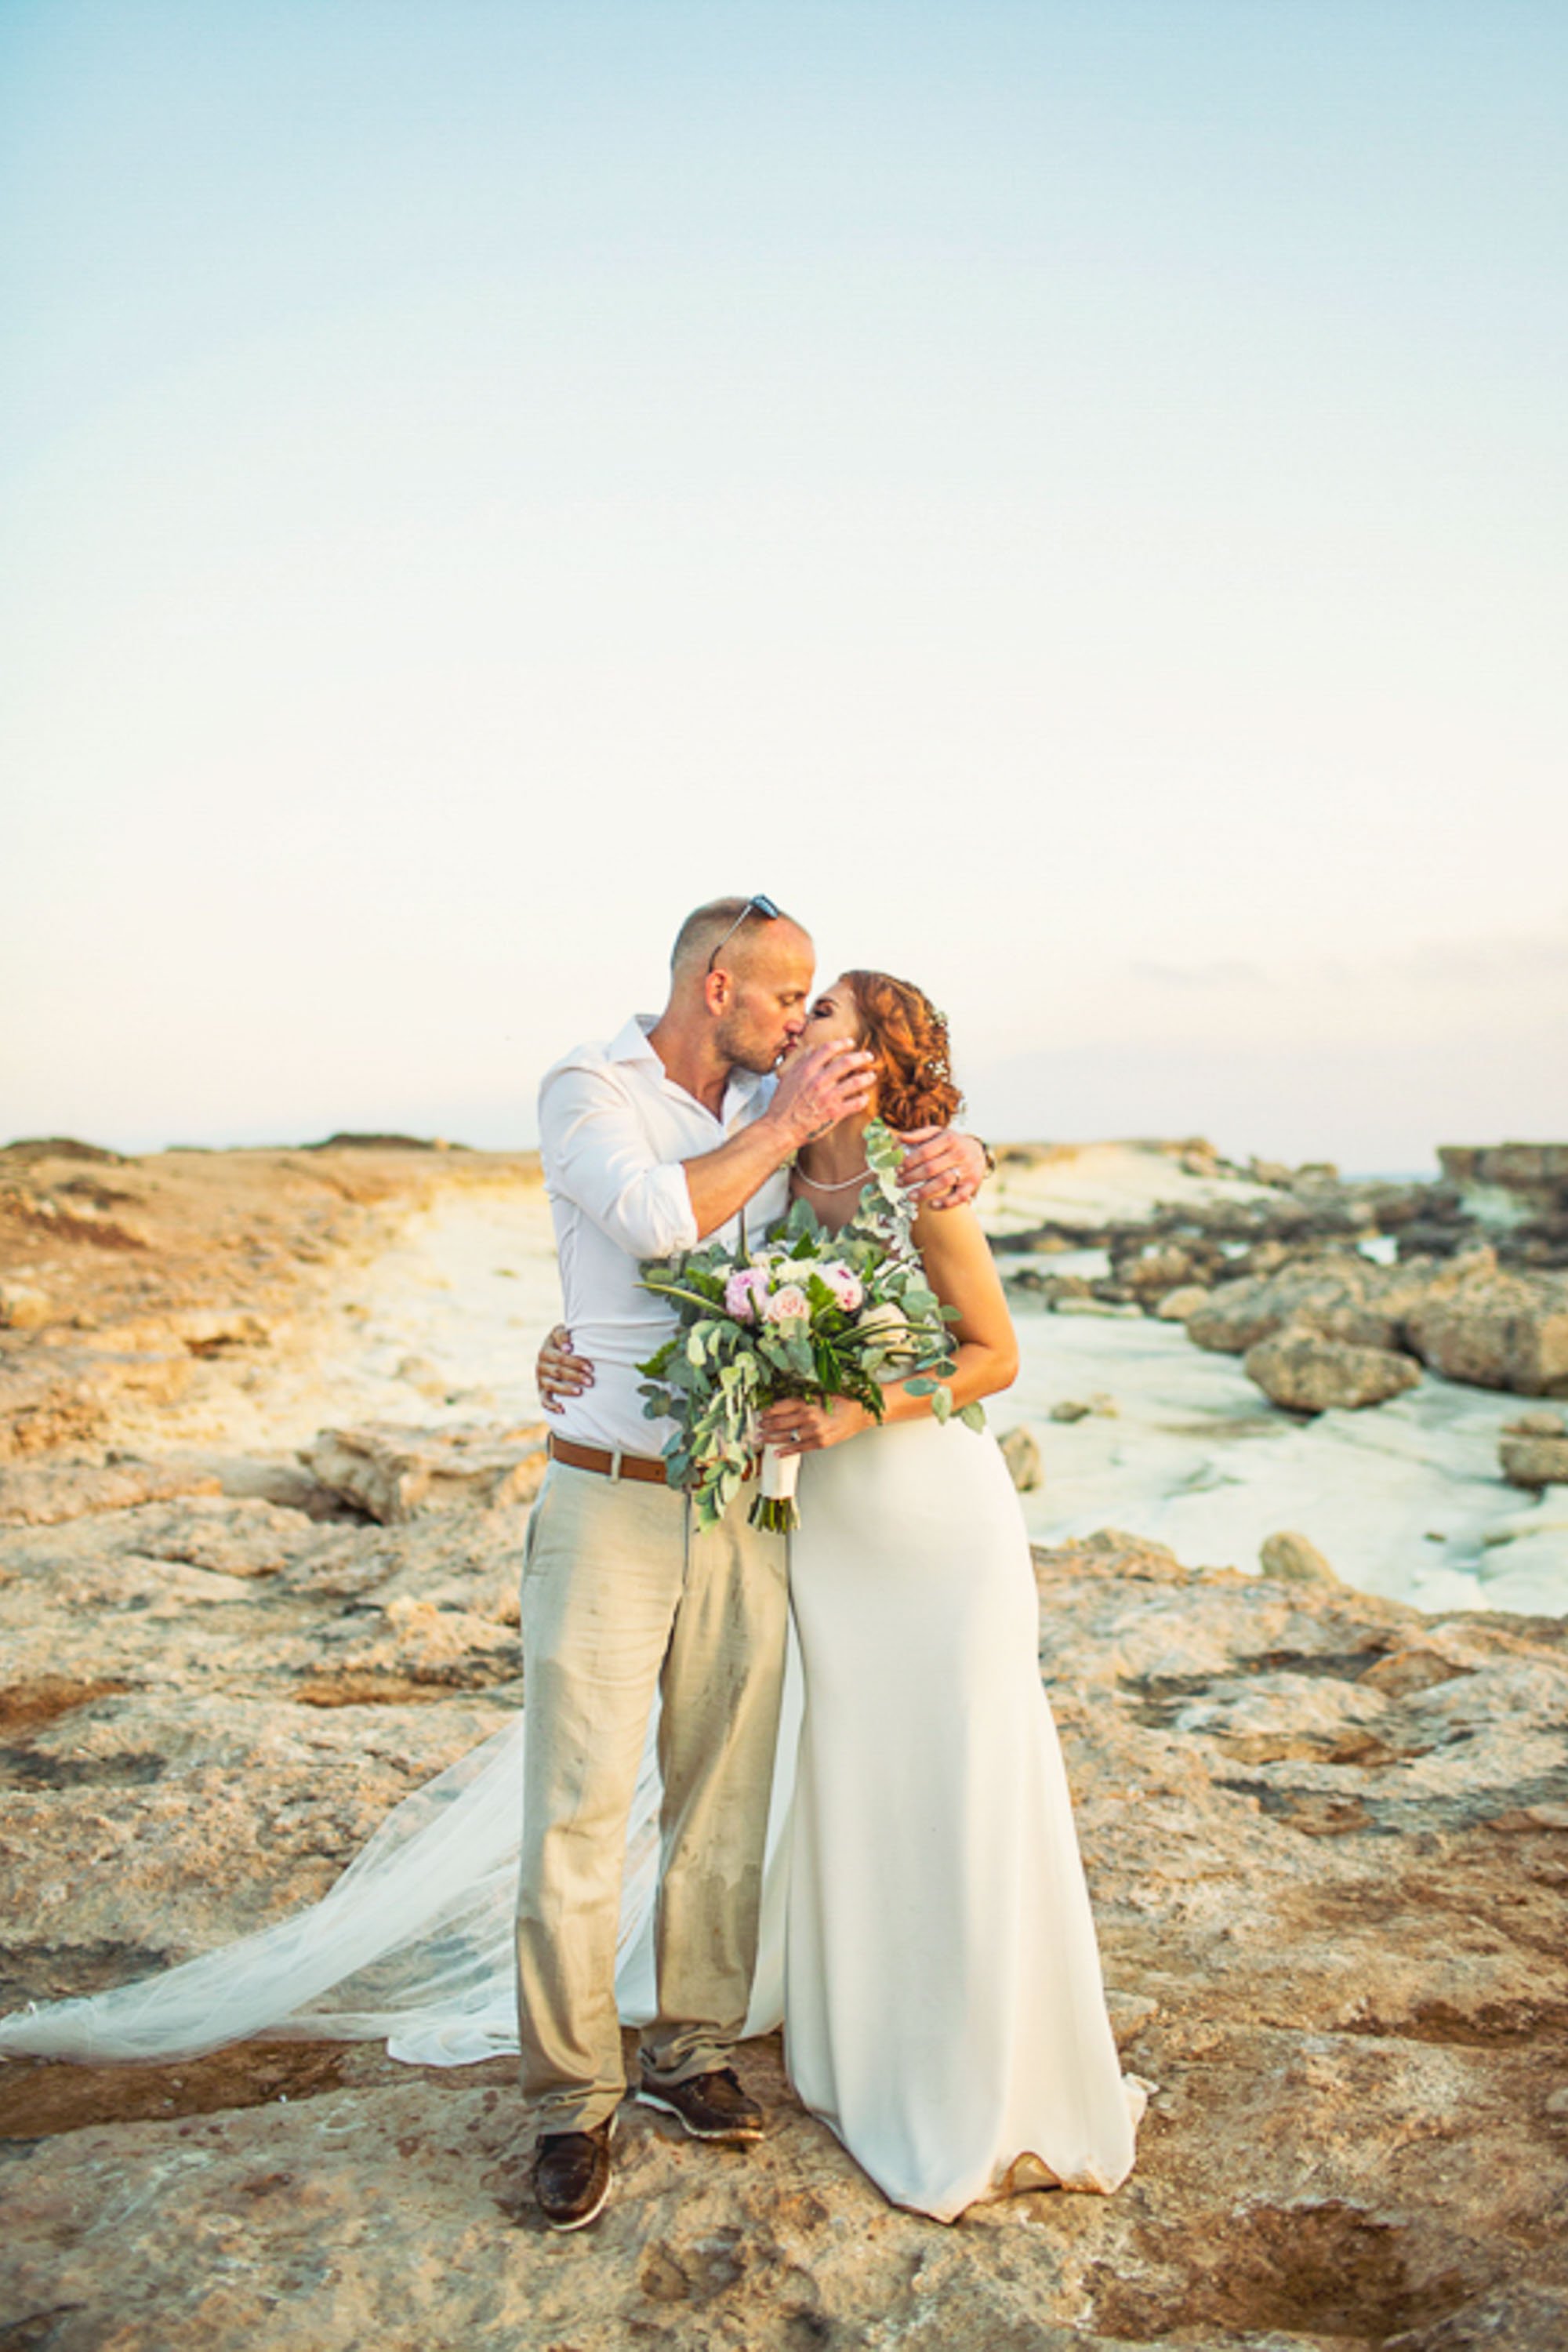 Wedding photography at St George's Beach, Peyia, Paphos, Cyprus.